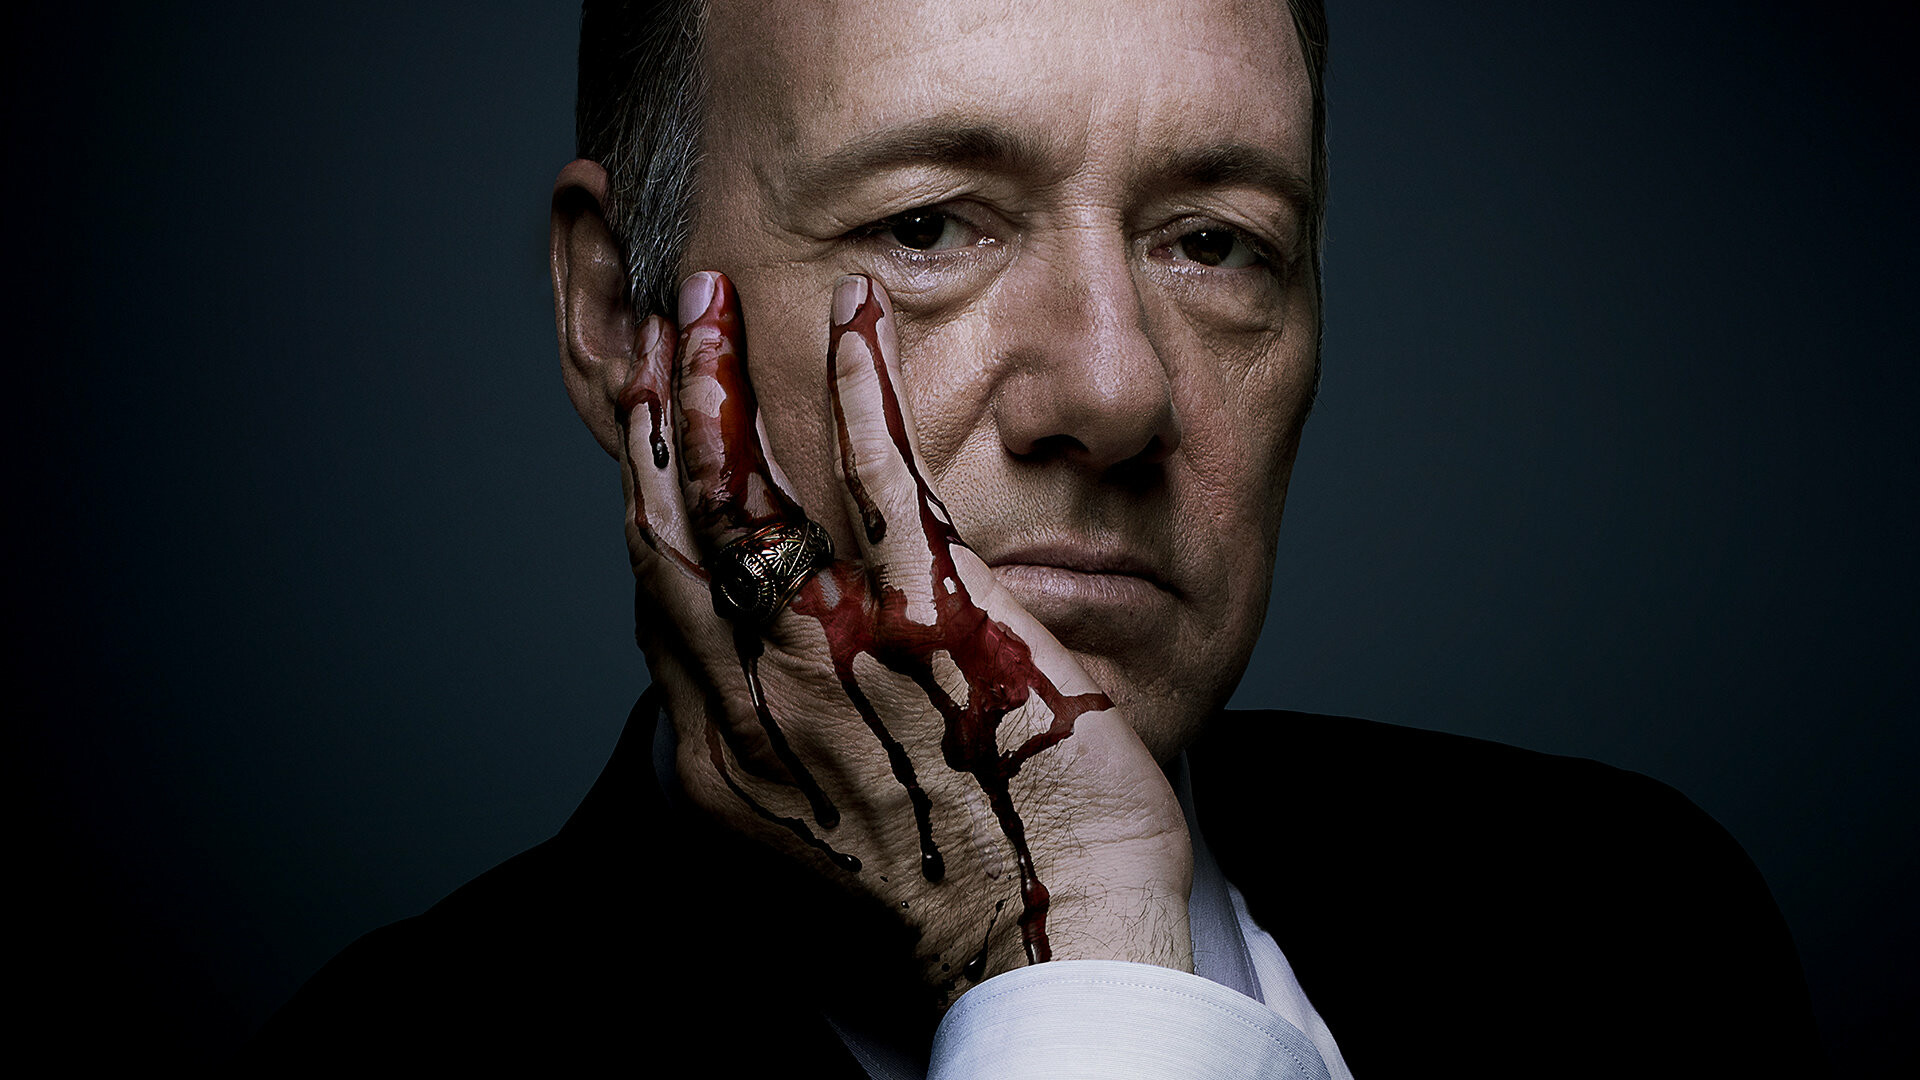 House of Cards: President Francis J. "Frank" Underwood portrayed by Kevin Spacey. 1920x1080 Full HD Background.